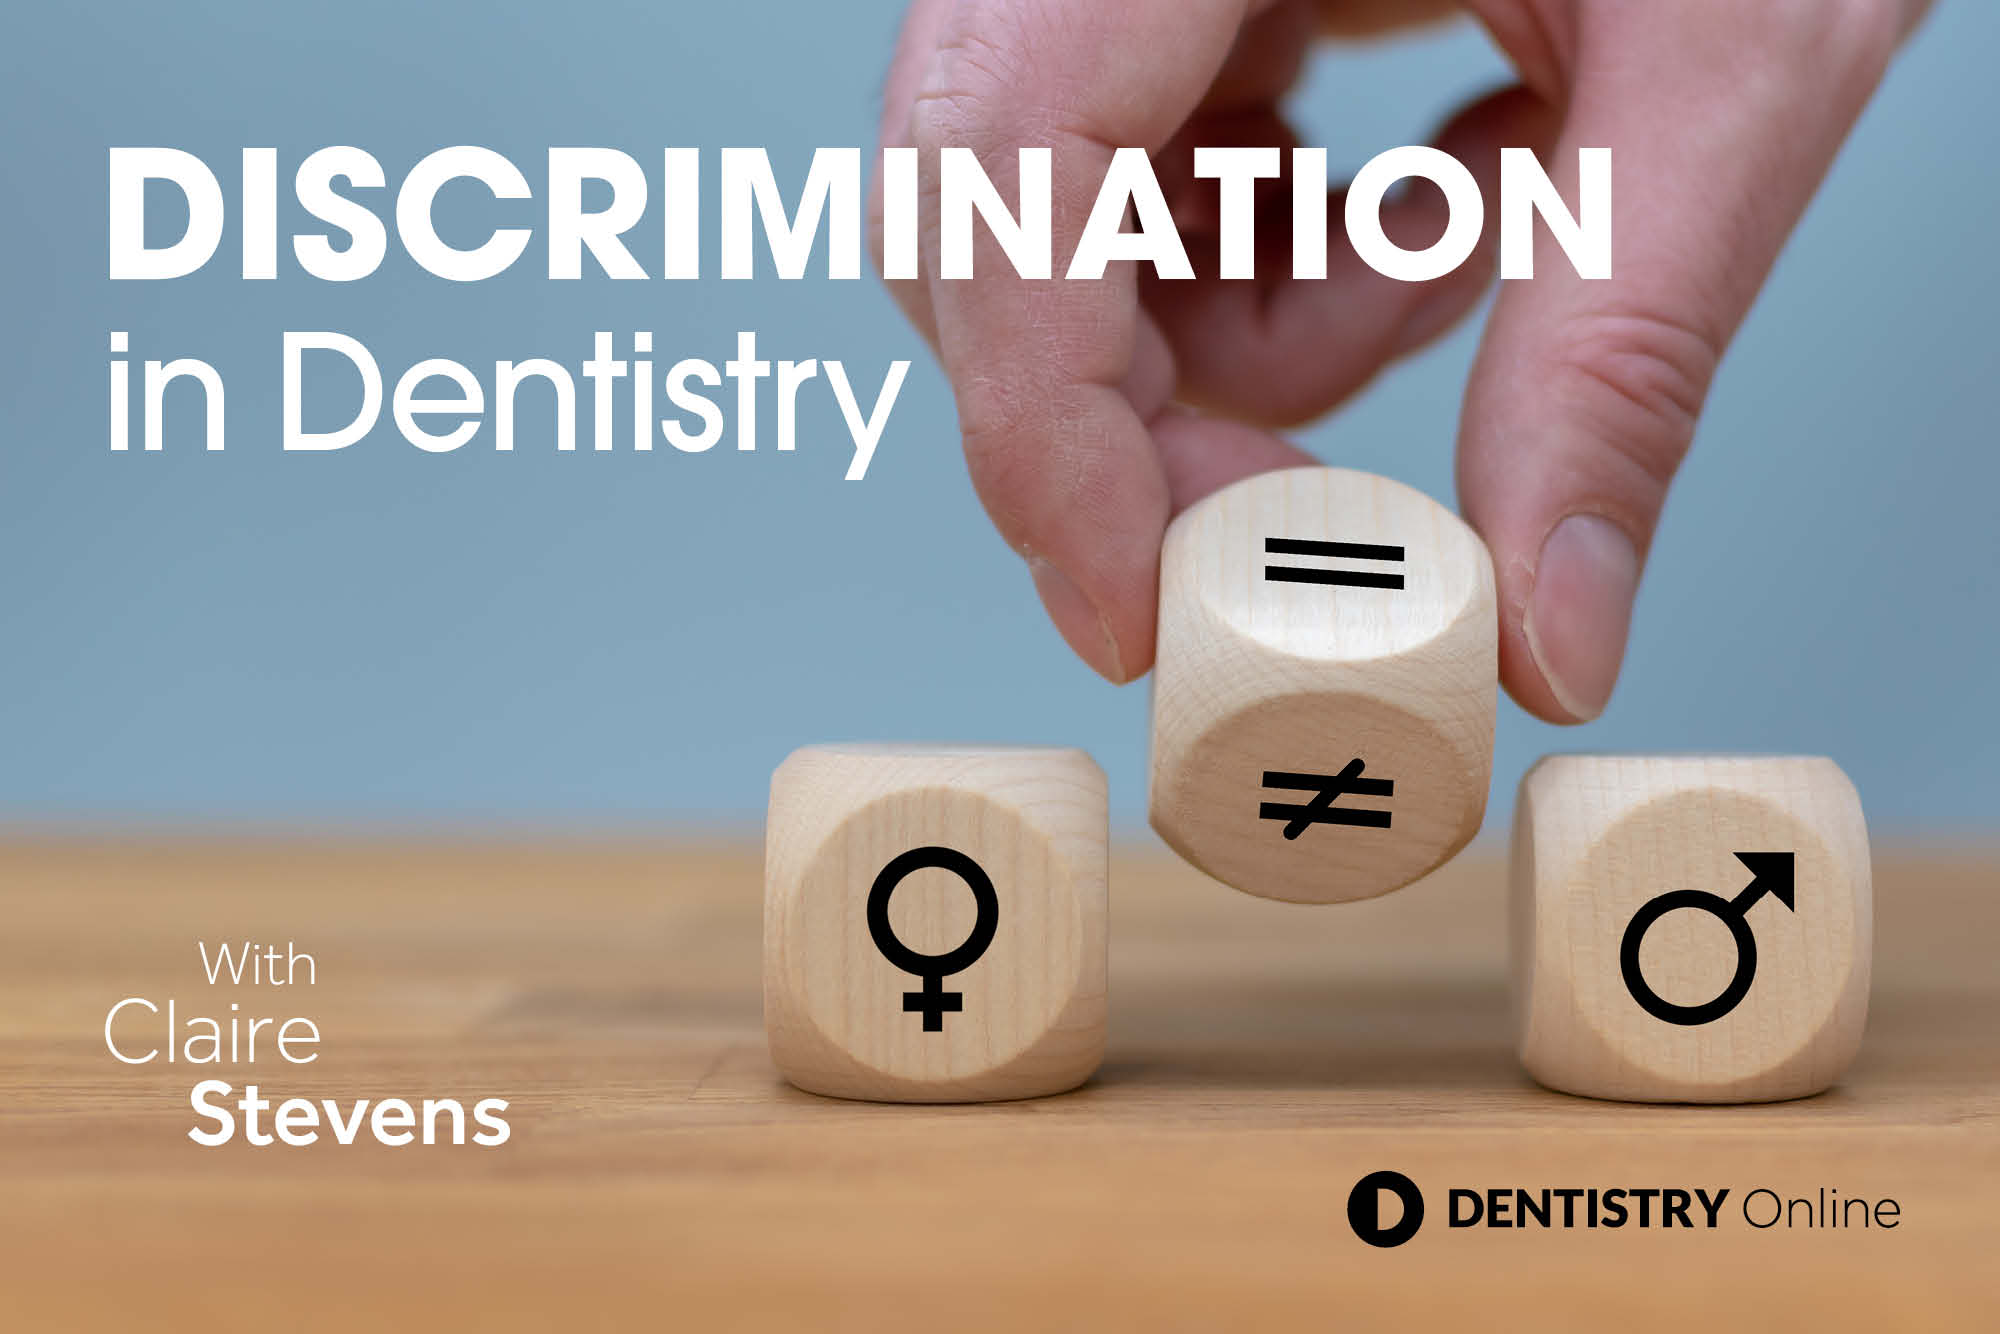 Claire Stevens outlines how diversity in dentistry can be improved and discrimination and bias eliminated